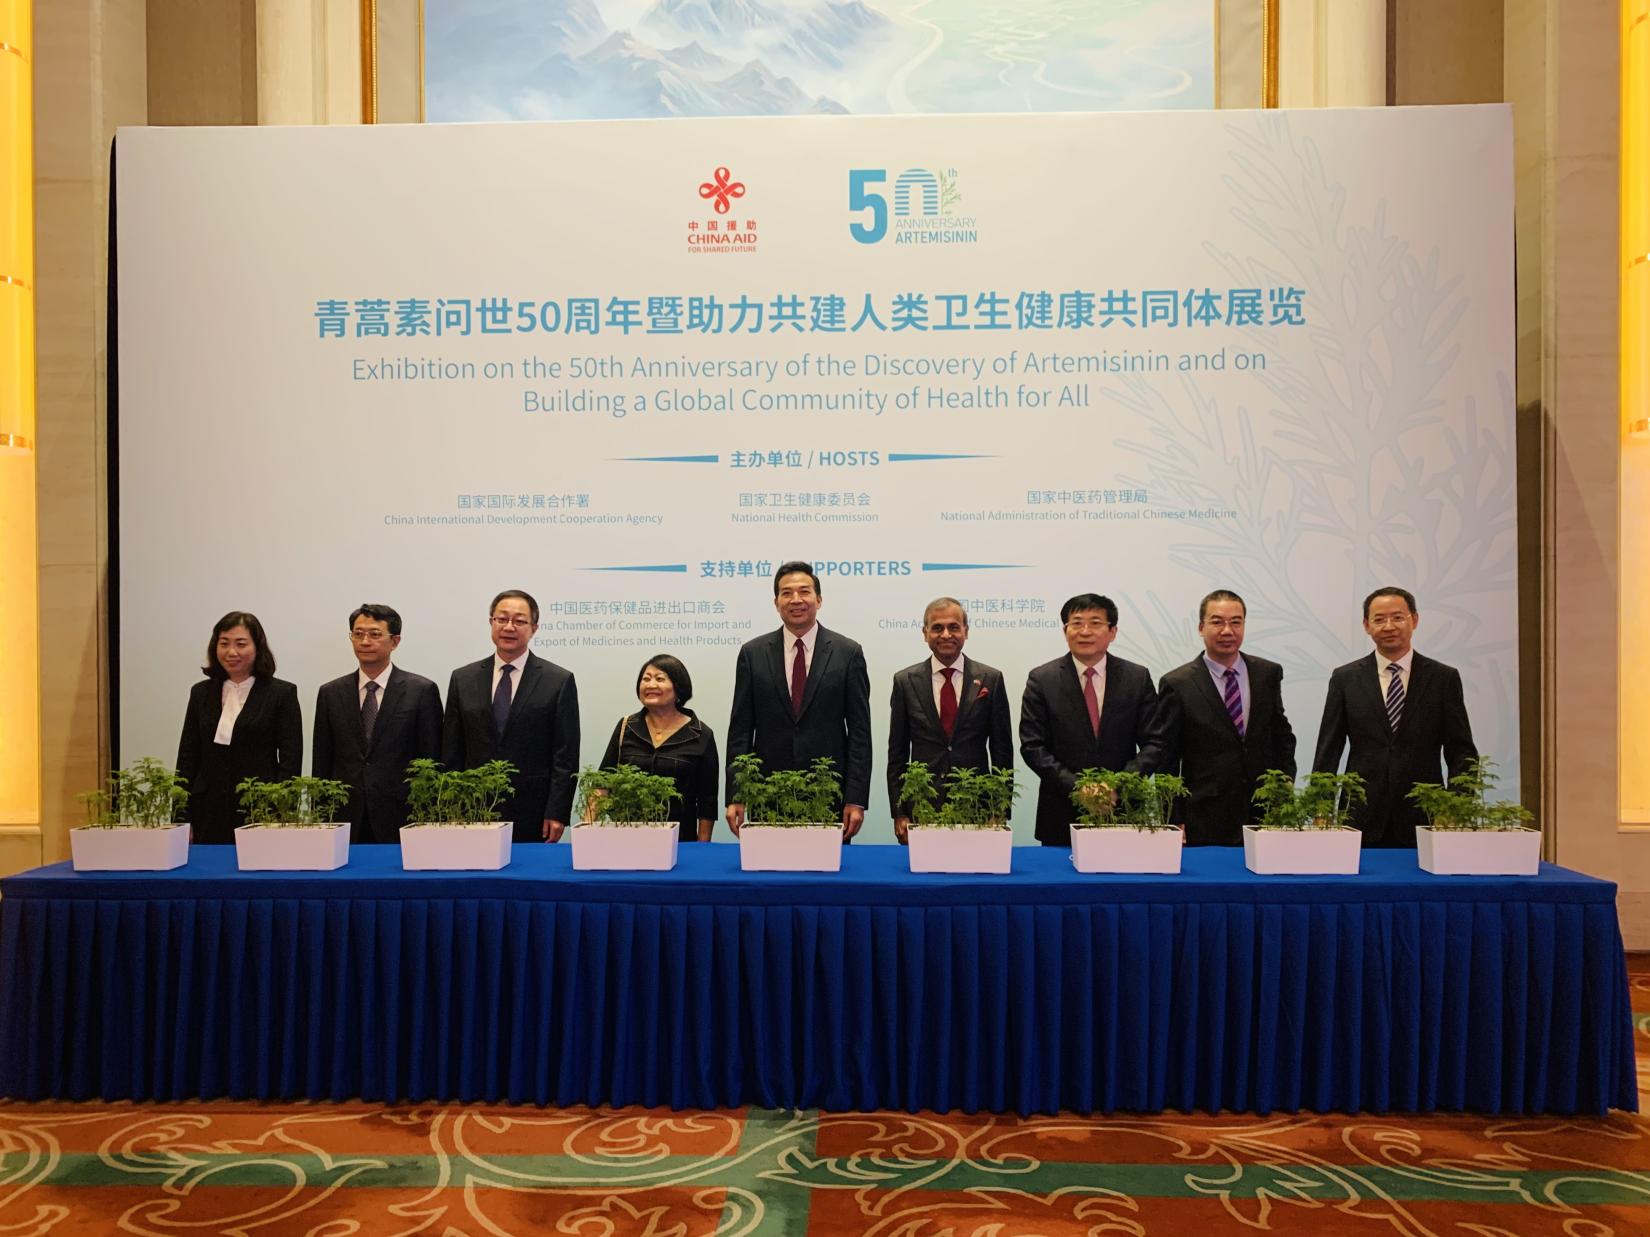 Luo Zhaohui, Chairman of the China International Development Cooperation Agency with distinguished guests at event